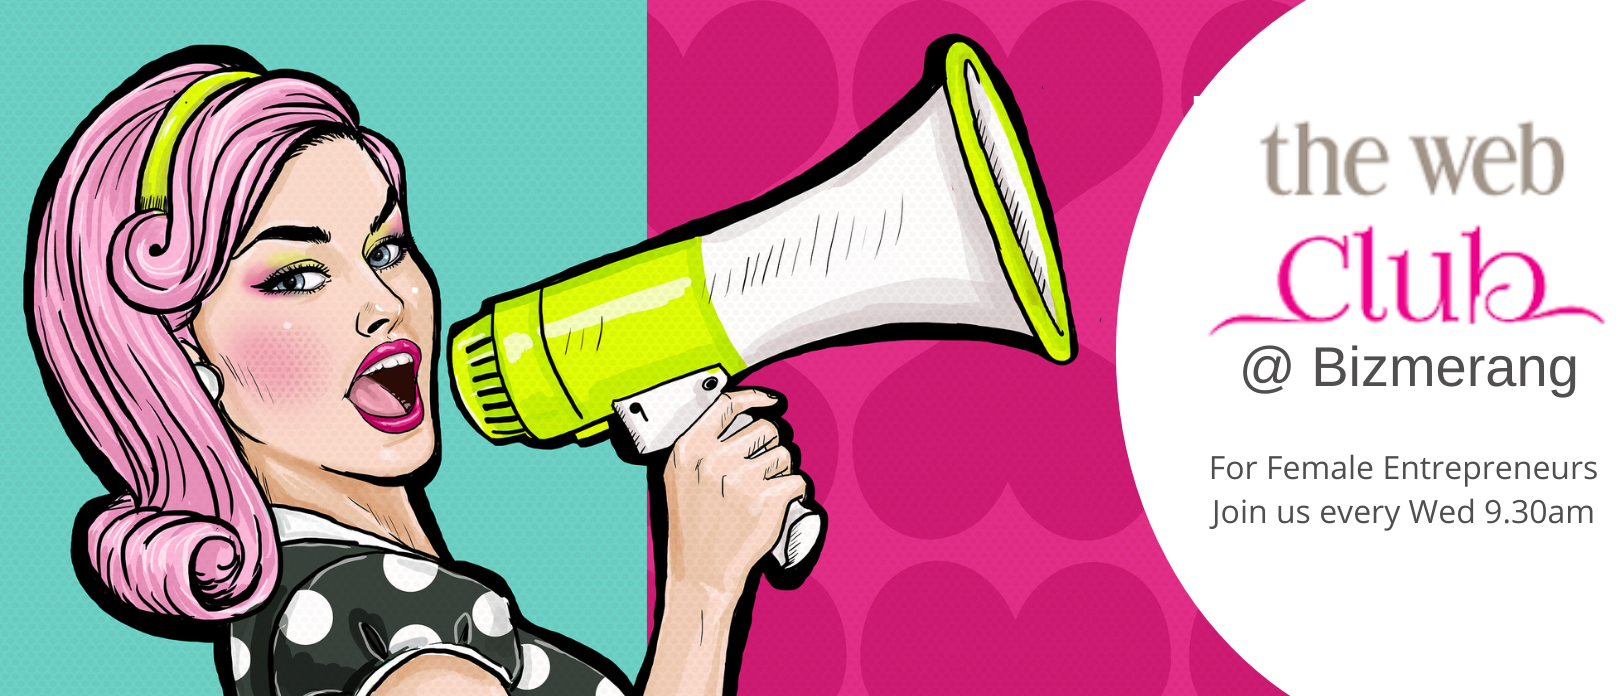 graphic of lady with megaphone advertising the web club